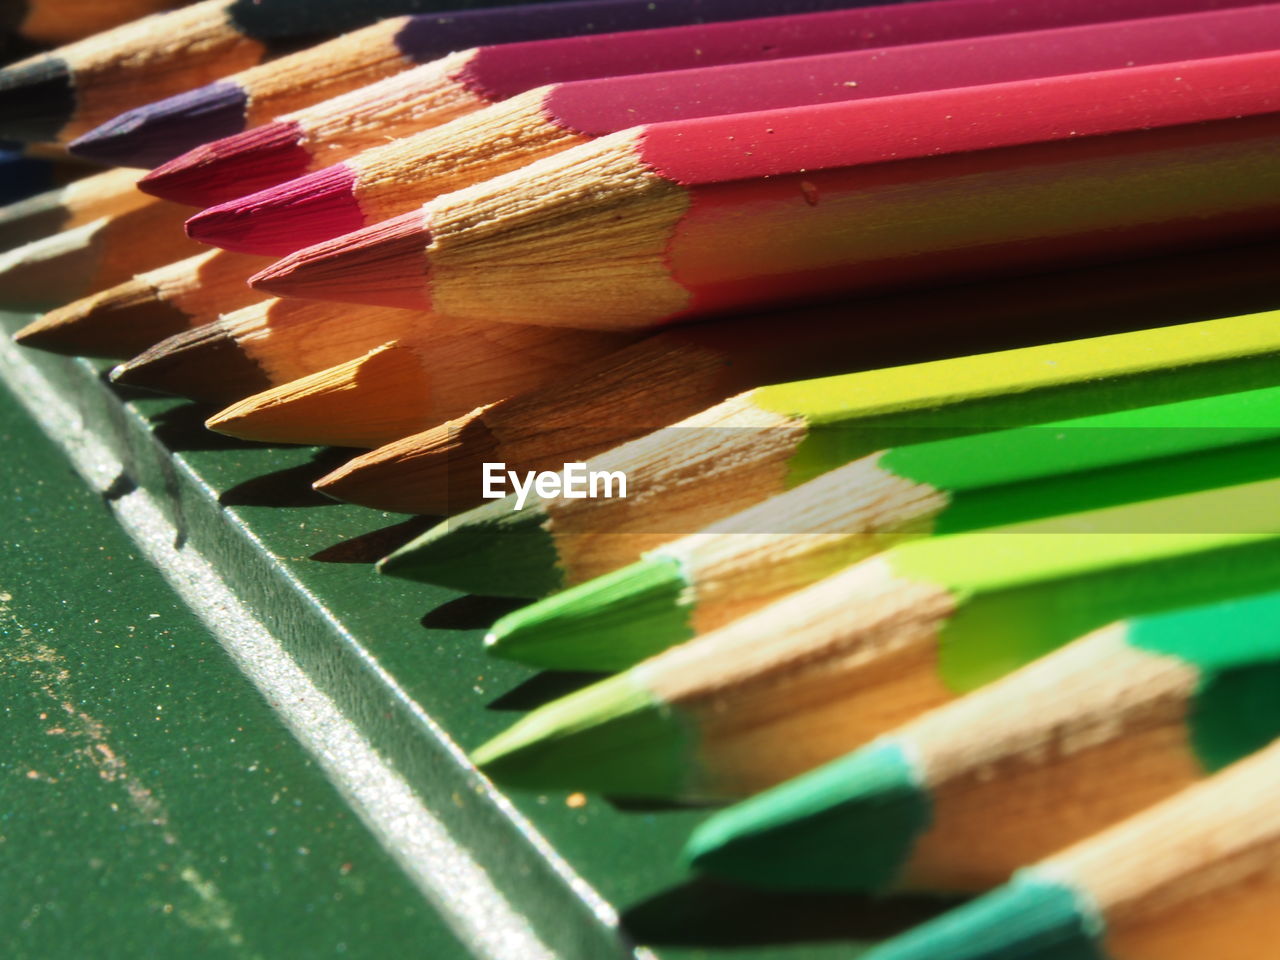 CLOSE-UP OF COLORED PENCILS ON WOOD